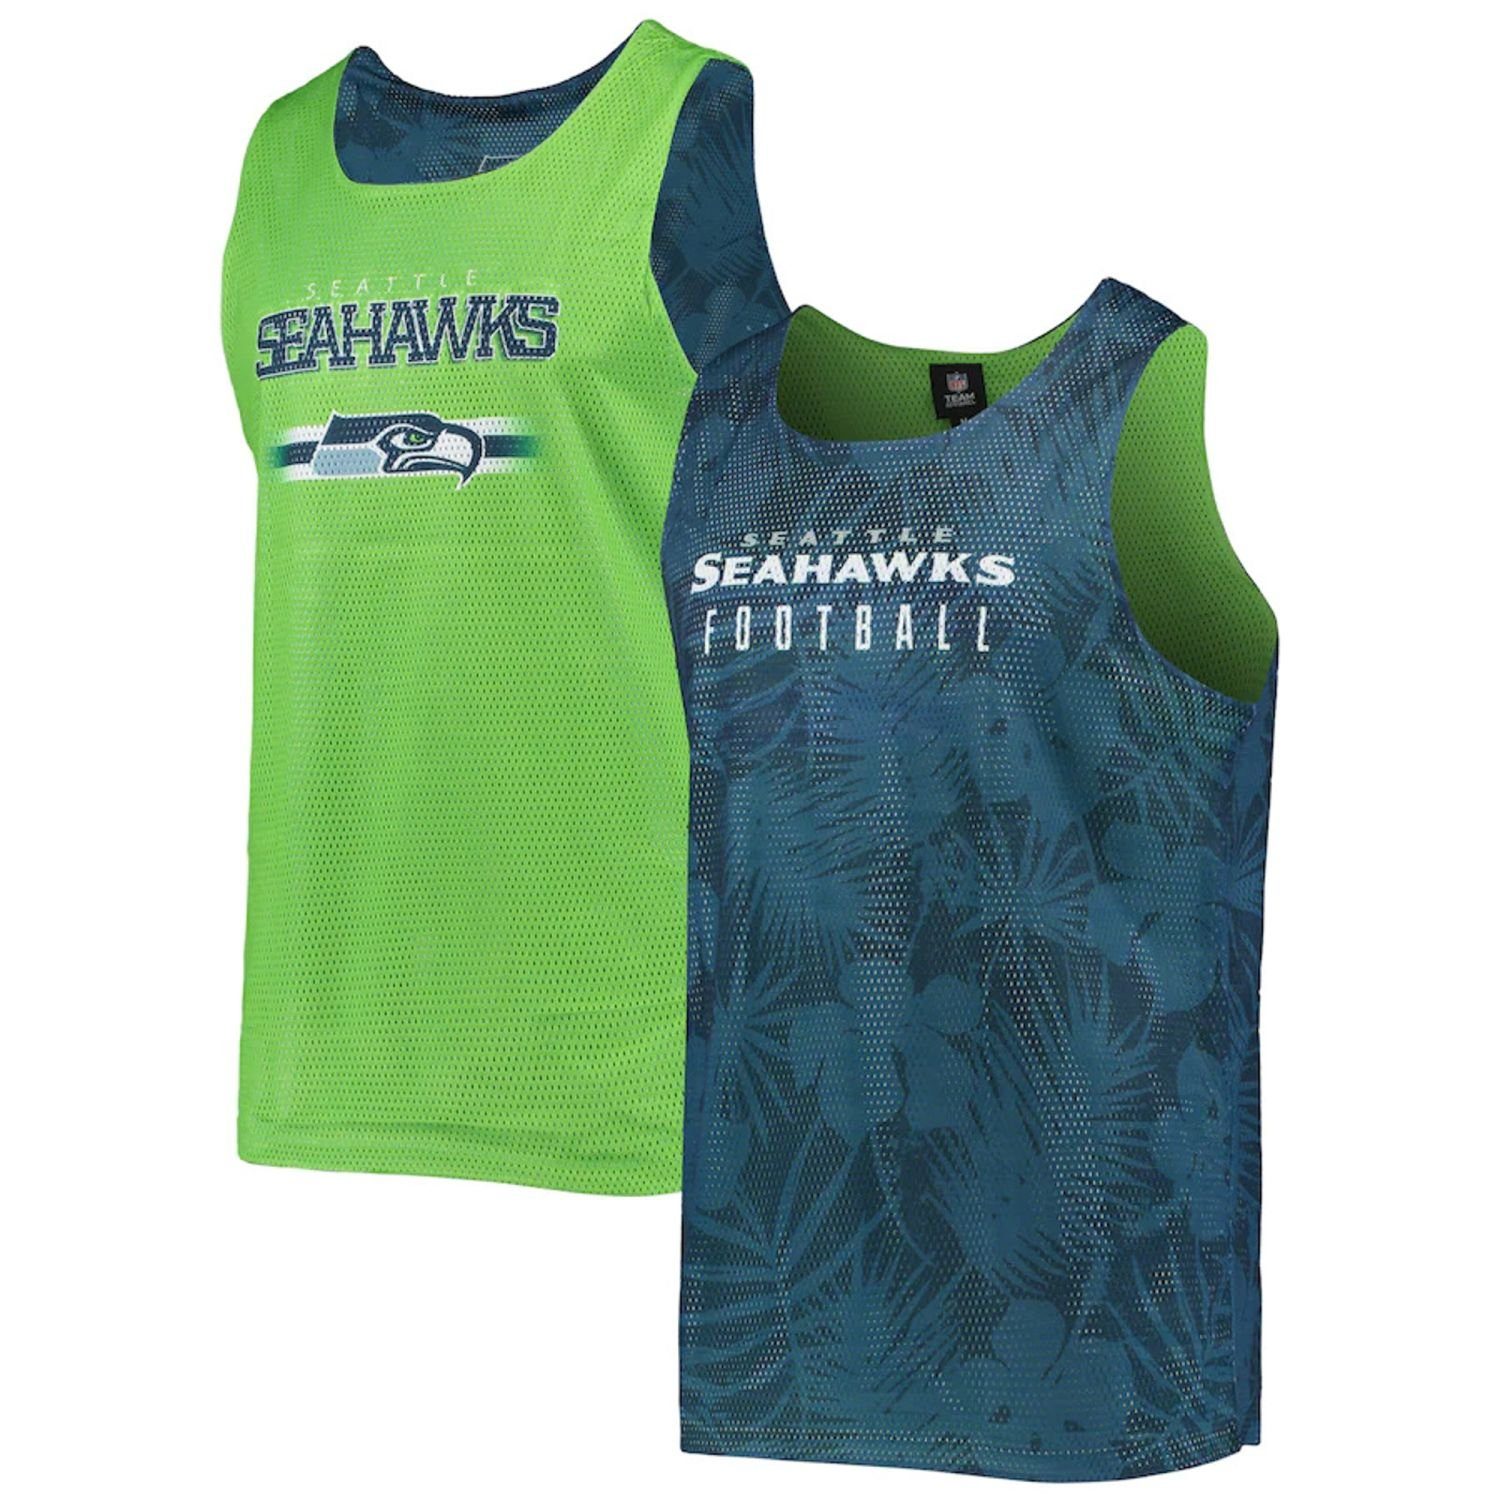 Seahawks Reversible Forever Floral Seattle Muskelshirt Collectibles NFL